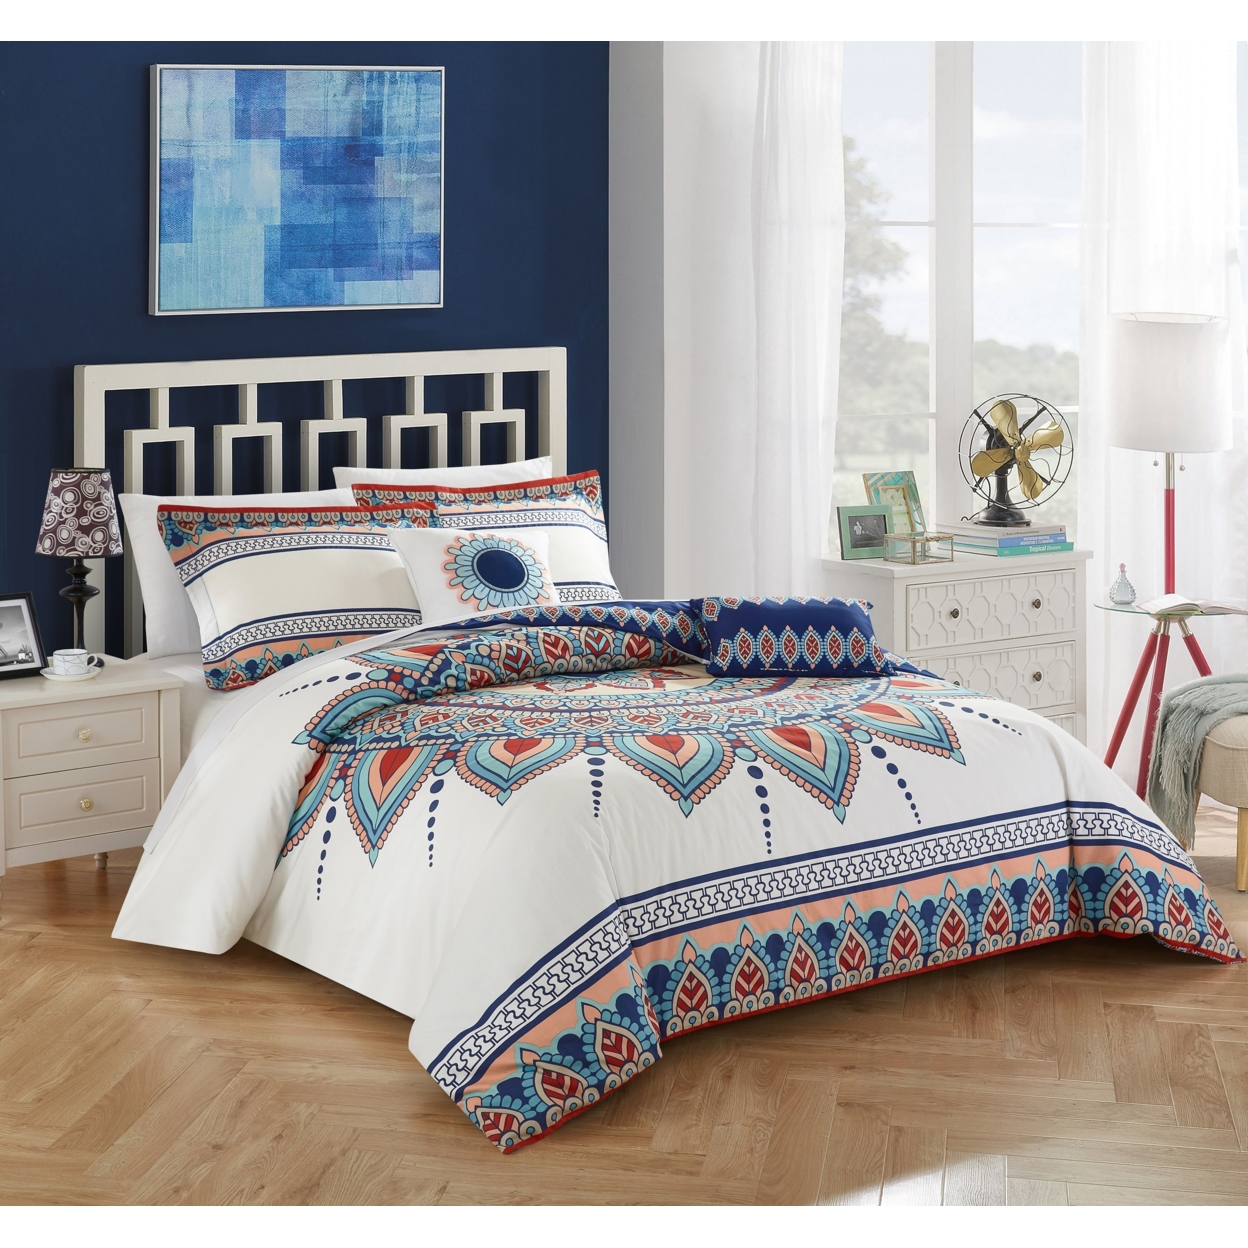 Chic Home 5 Piece Popo 100% Cotton 200 Thread Count Panel Frame Boho Printed REVERSIBLE Comforter Set - King